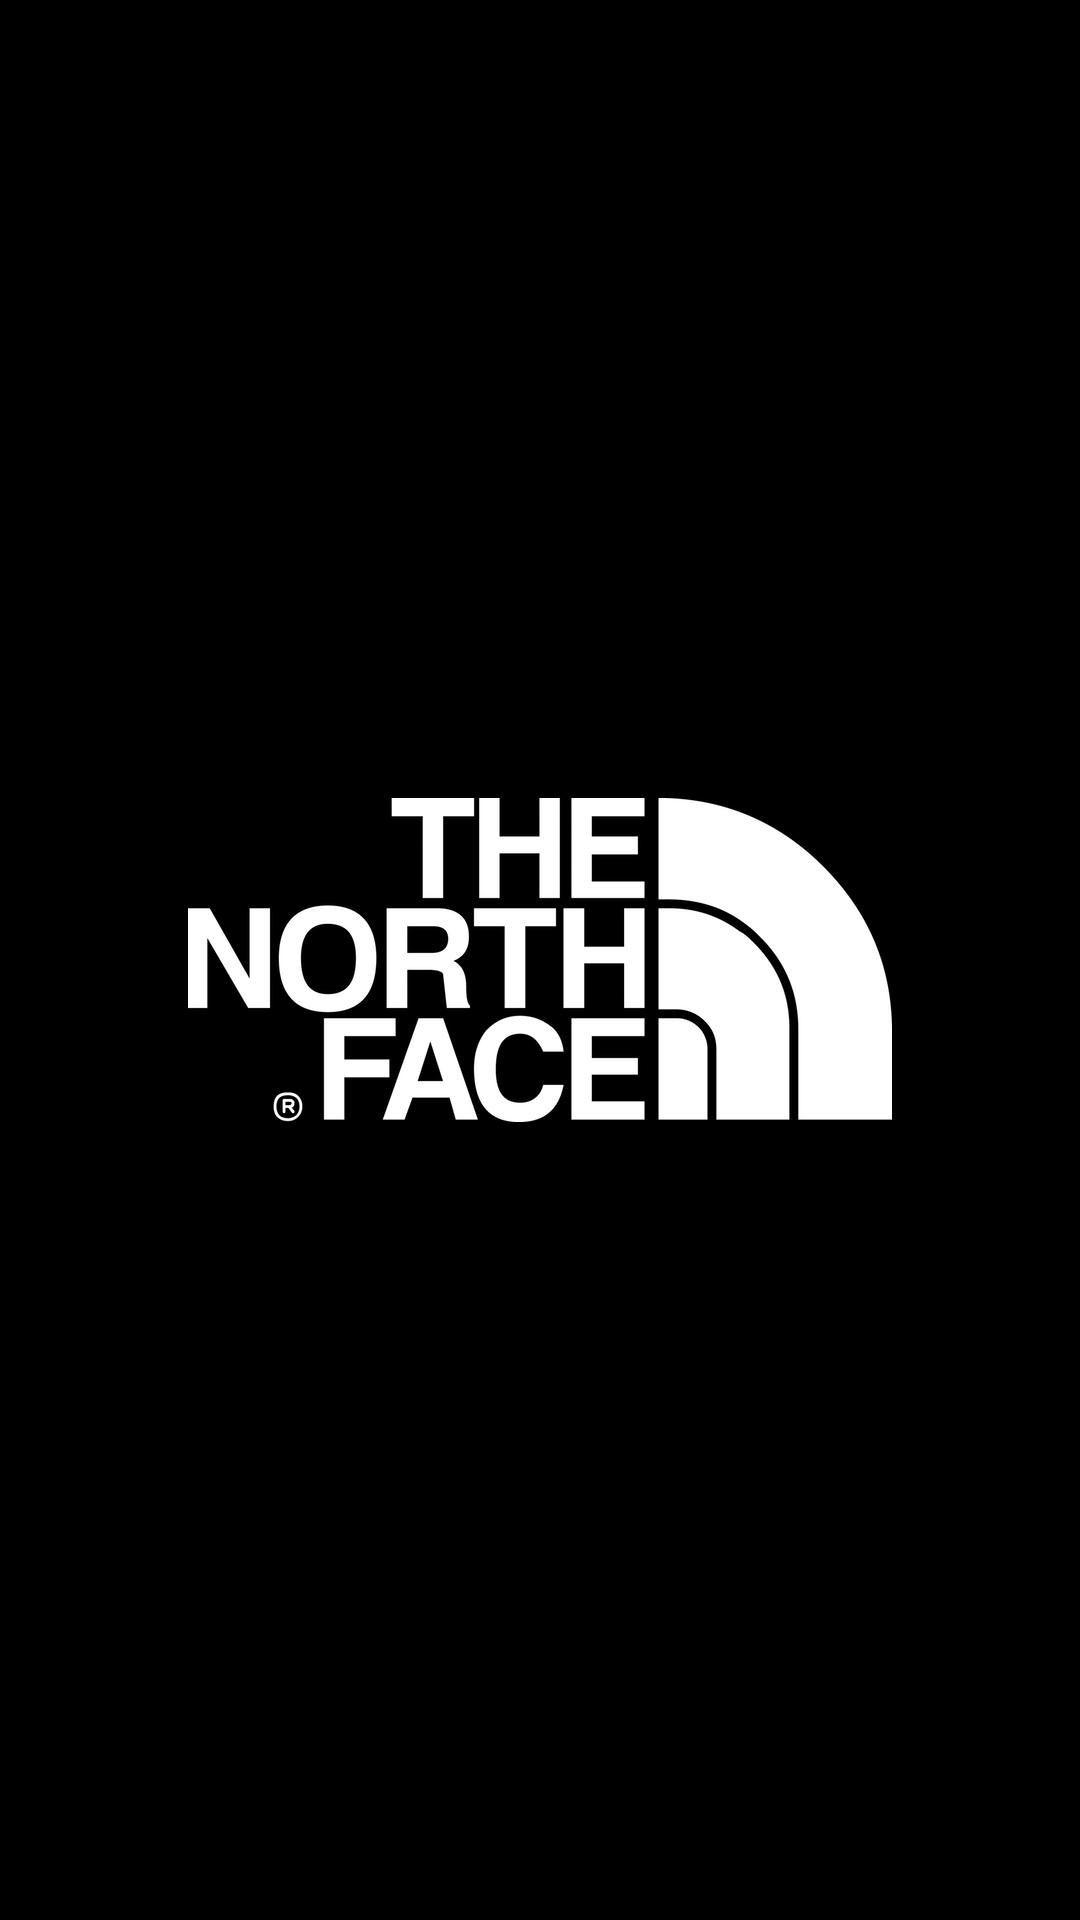 North Face HD Wallpapers - Wallpaper Cave